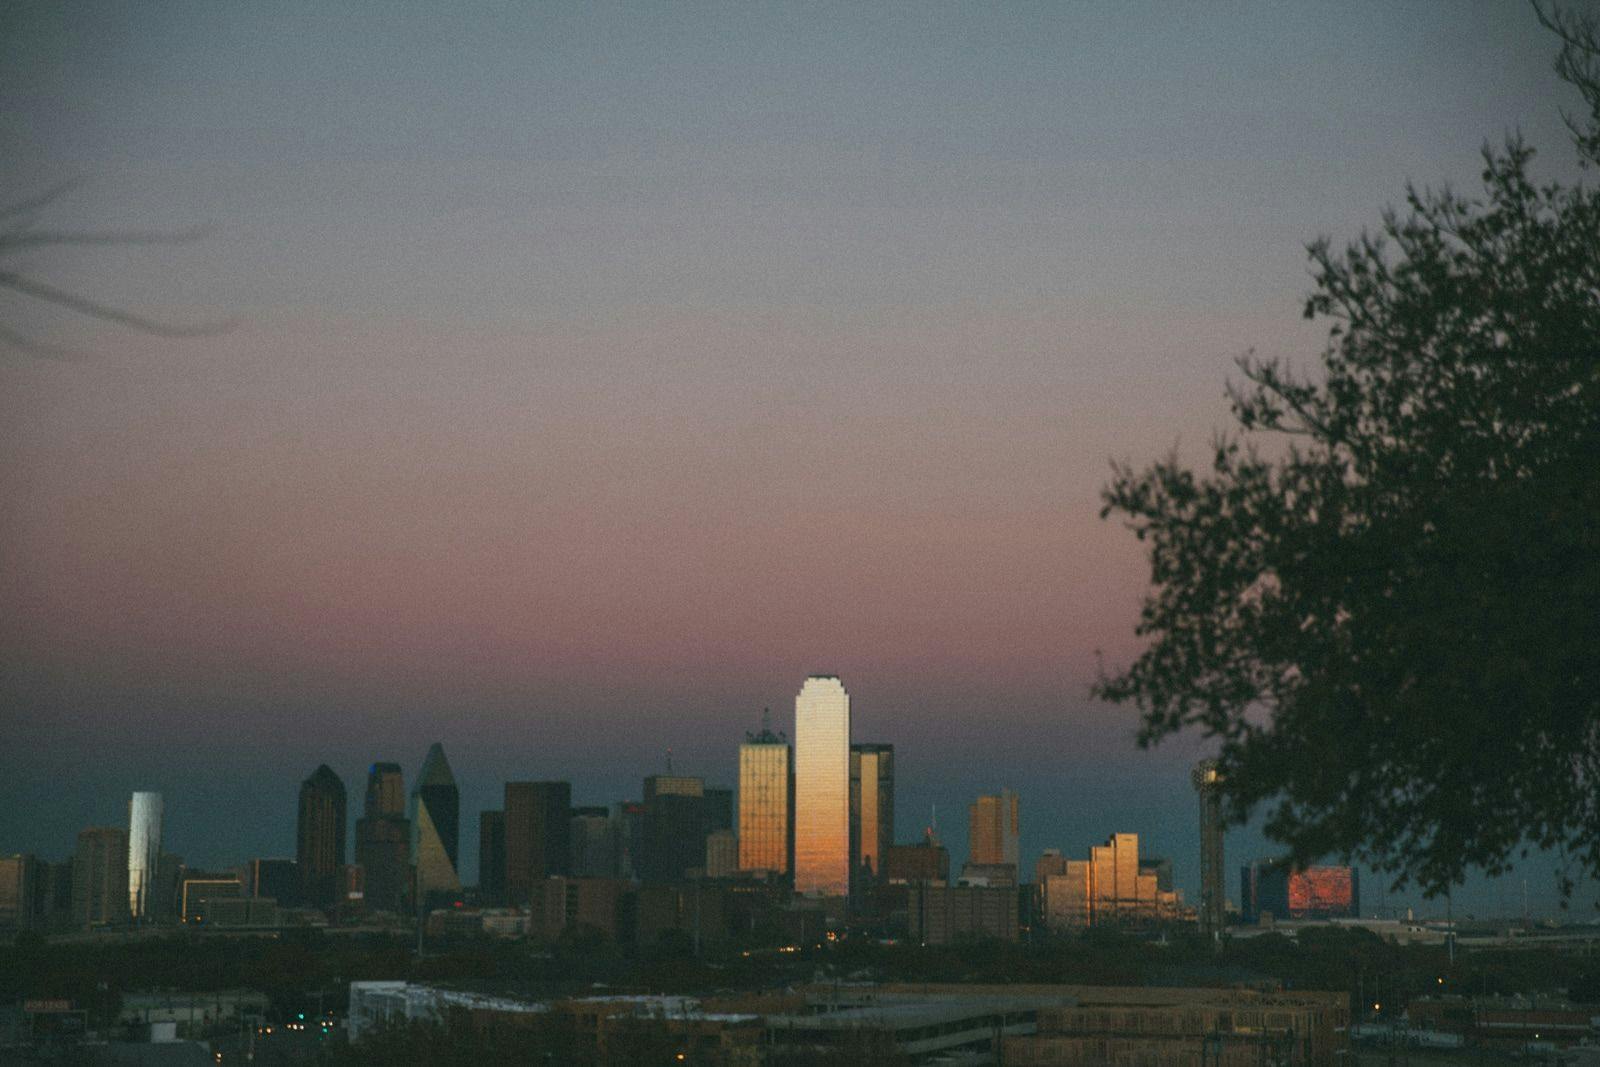 View of the Dallas skyline at dusk